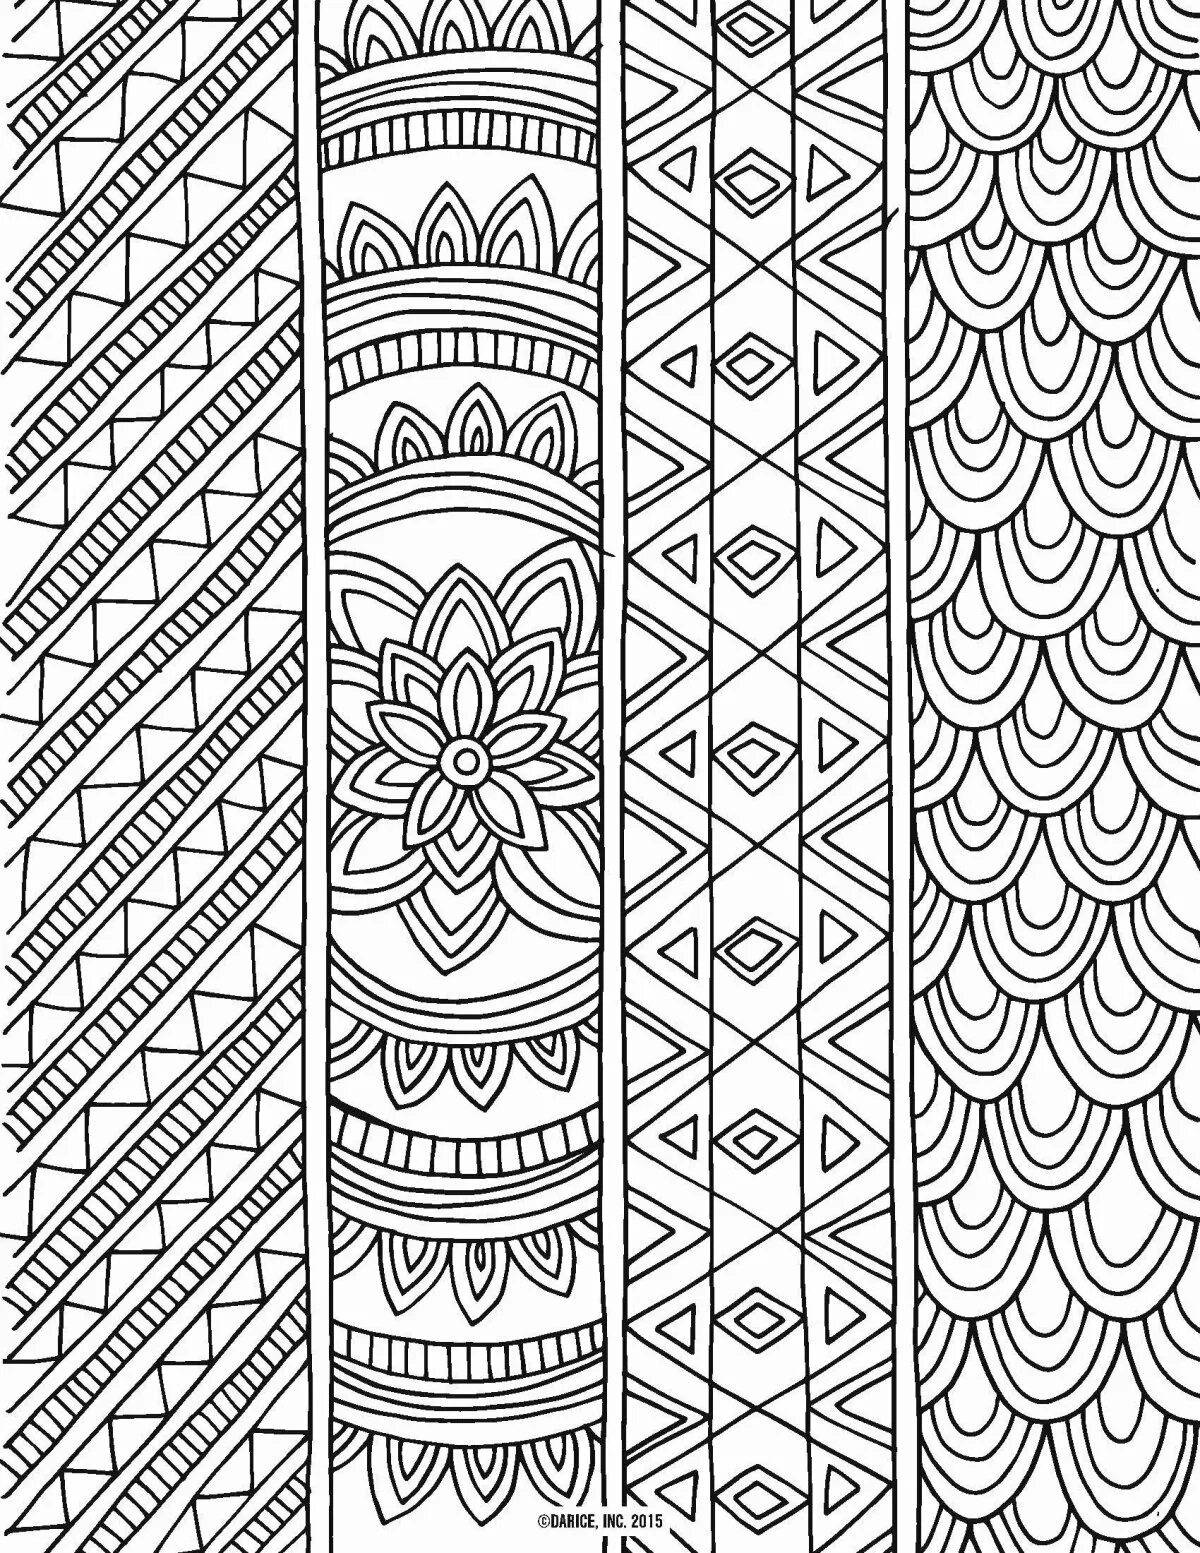 Animated patterns and ornaments for coloring pages for children